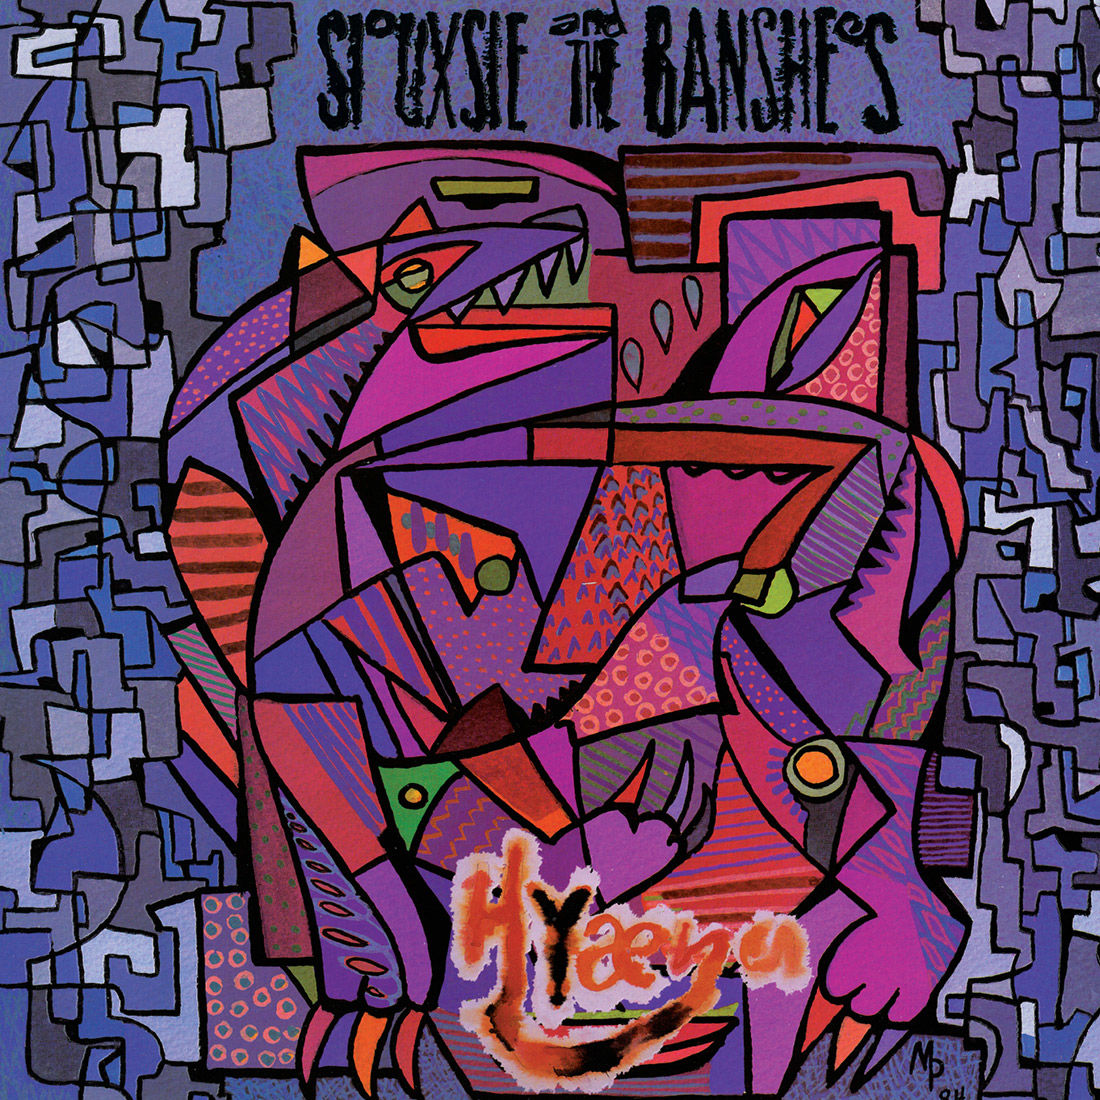 SIOUXSIE AND THE BANSHEES - HYAENA Vinyl LP